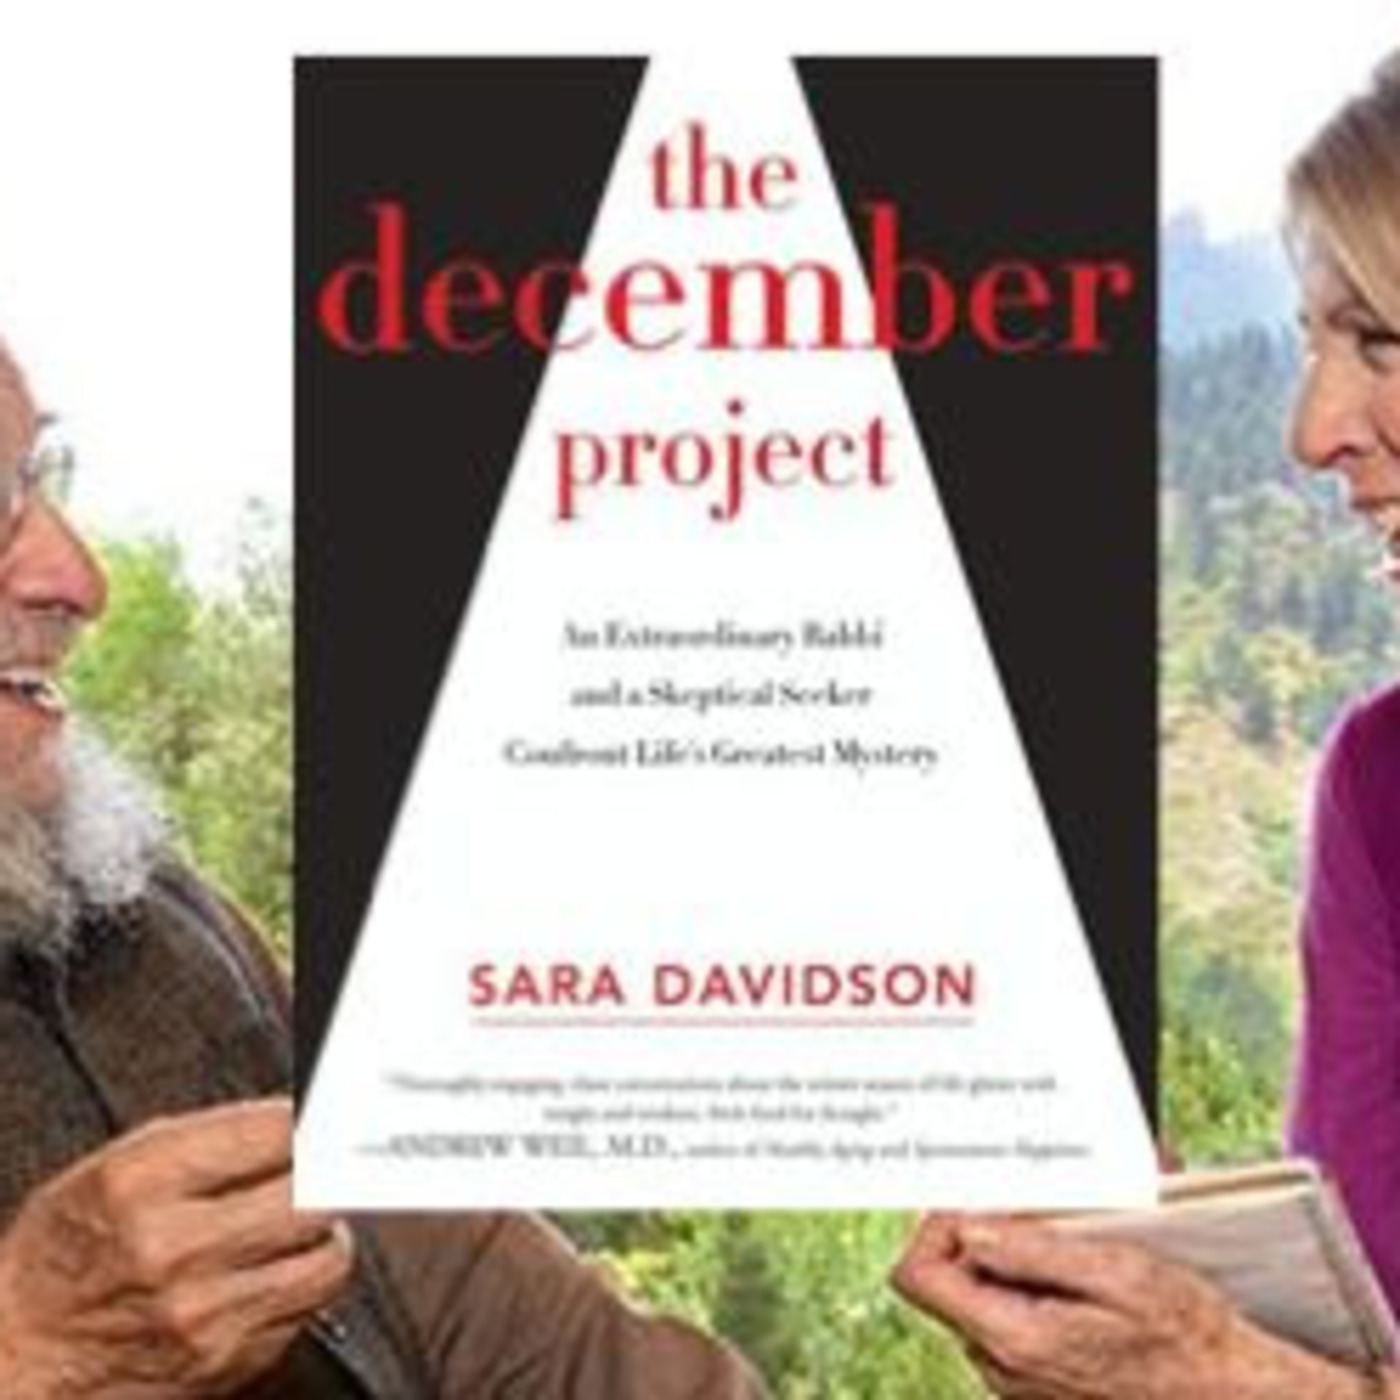 Free Forum Q&A: SARA DAVIDSON, author of THE DECEMBER PROJECT: An Extraordinary Rabbi and a Skeptical Seeker Take Aim at Our Greatest Mystery